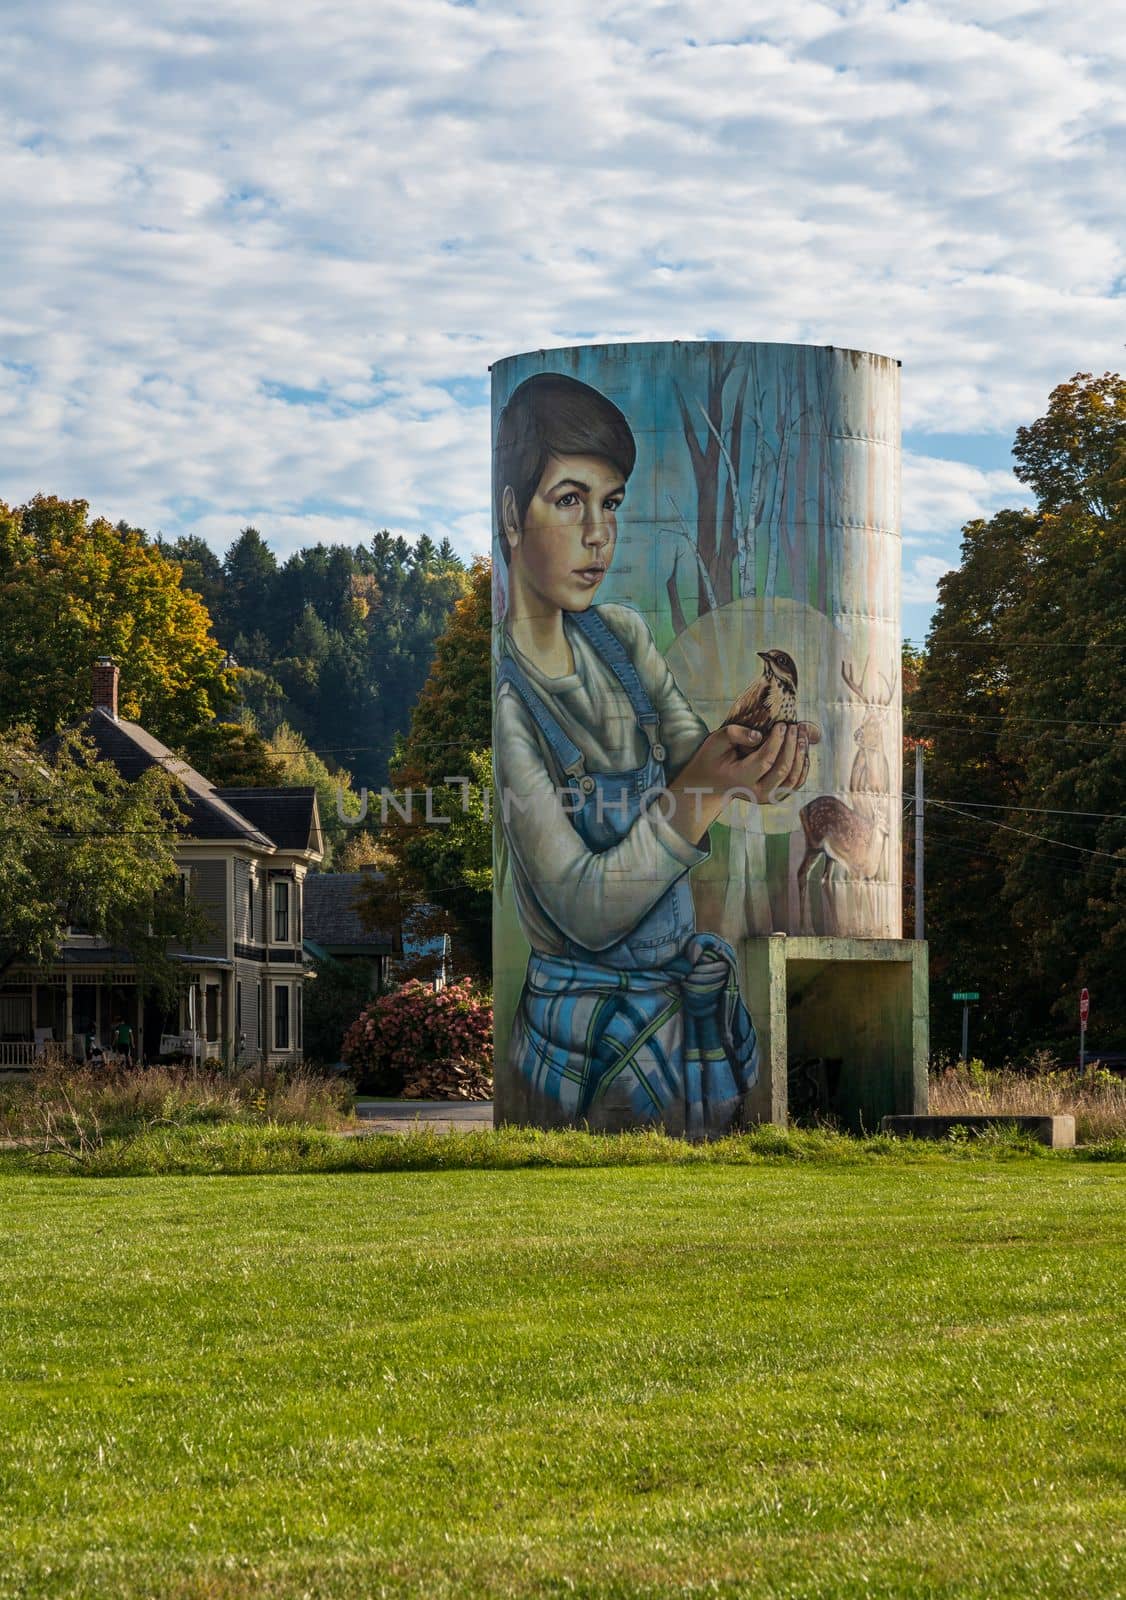 Mural on concrete silos in Jefferson Vermont by steheap